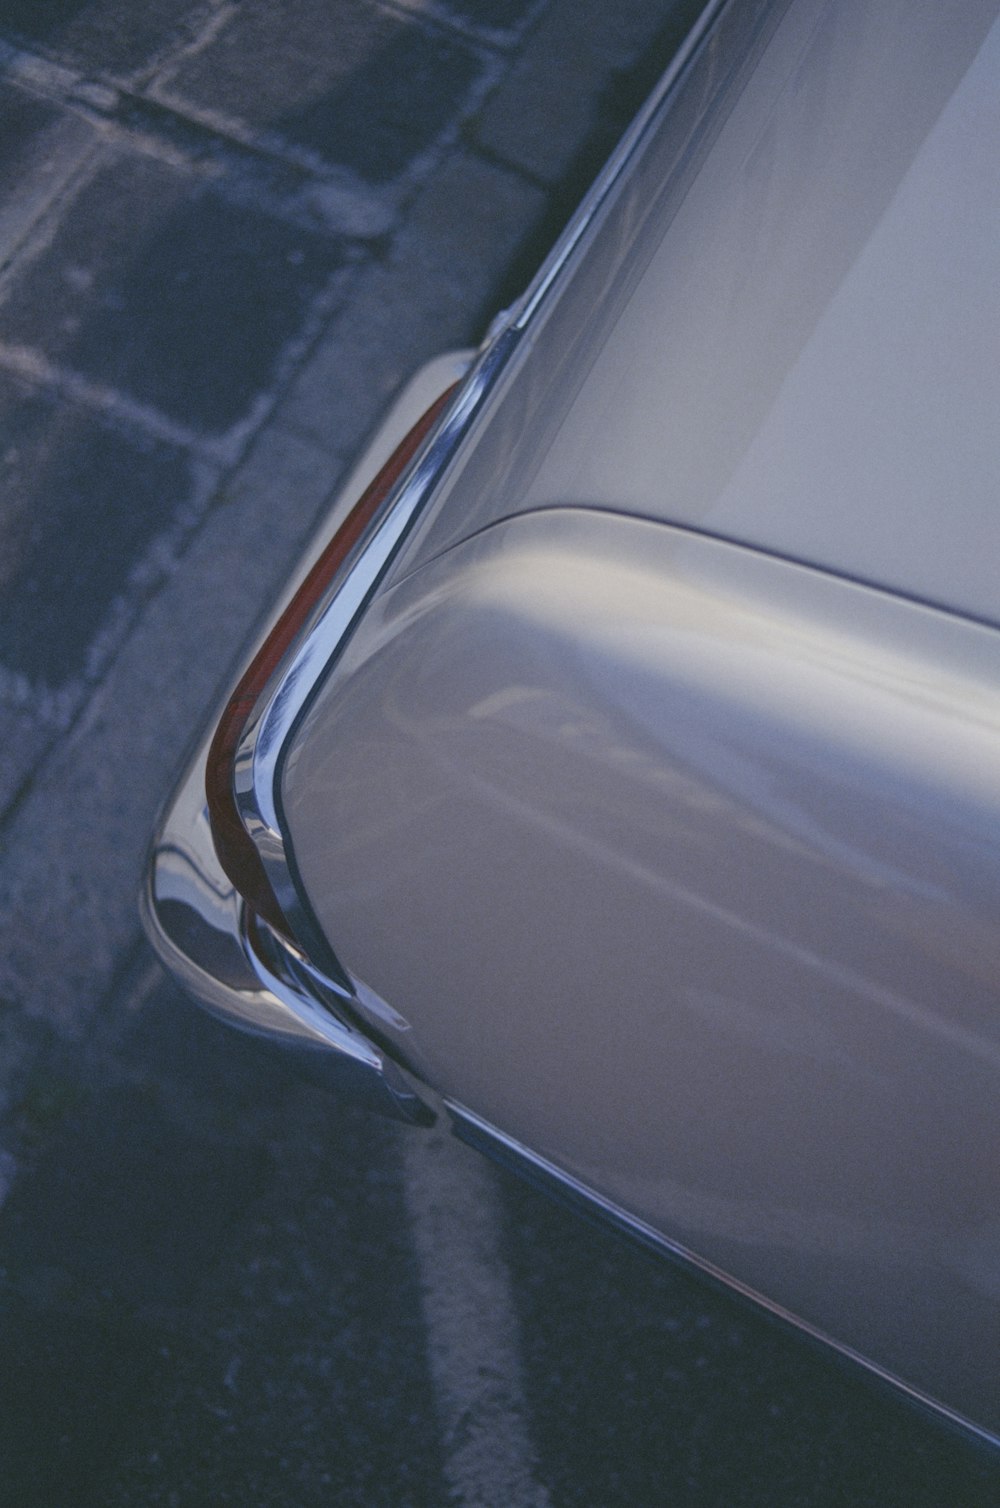 a close up of the tail end of a car